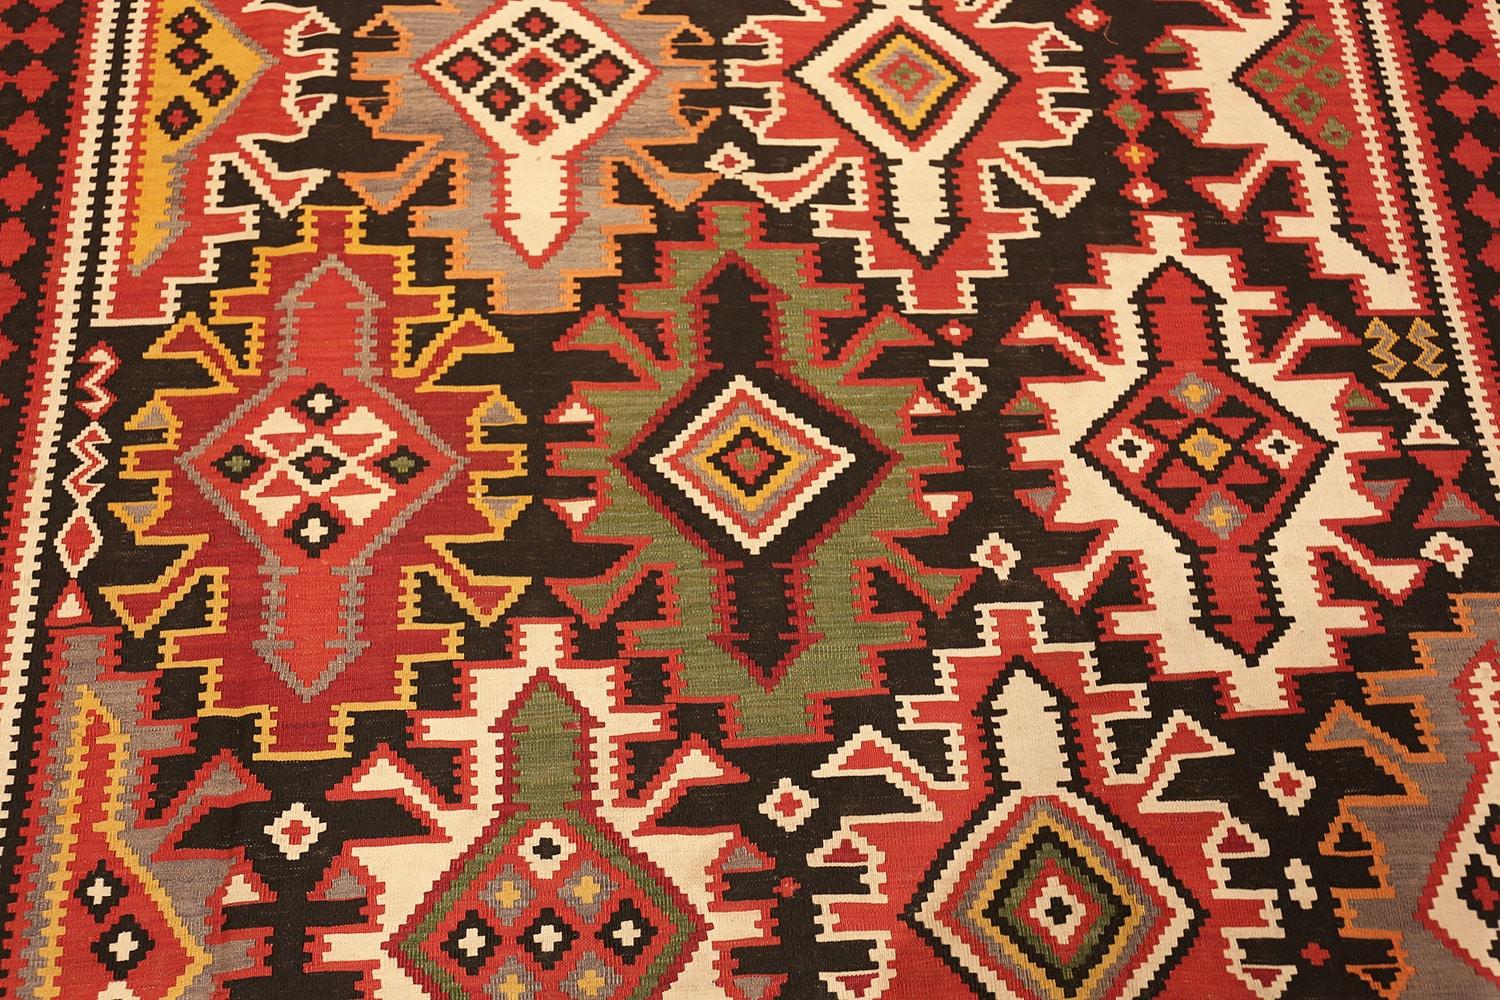 Hand-Woven Vintage Caucasian Kilim Rug. Size: 6 ft x 11 ft 9 in For Sale